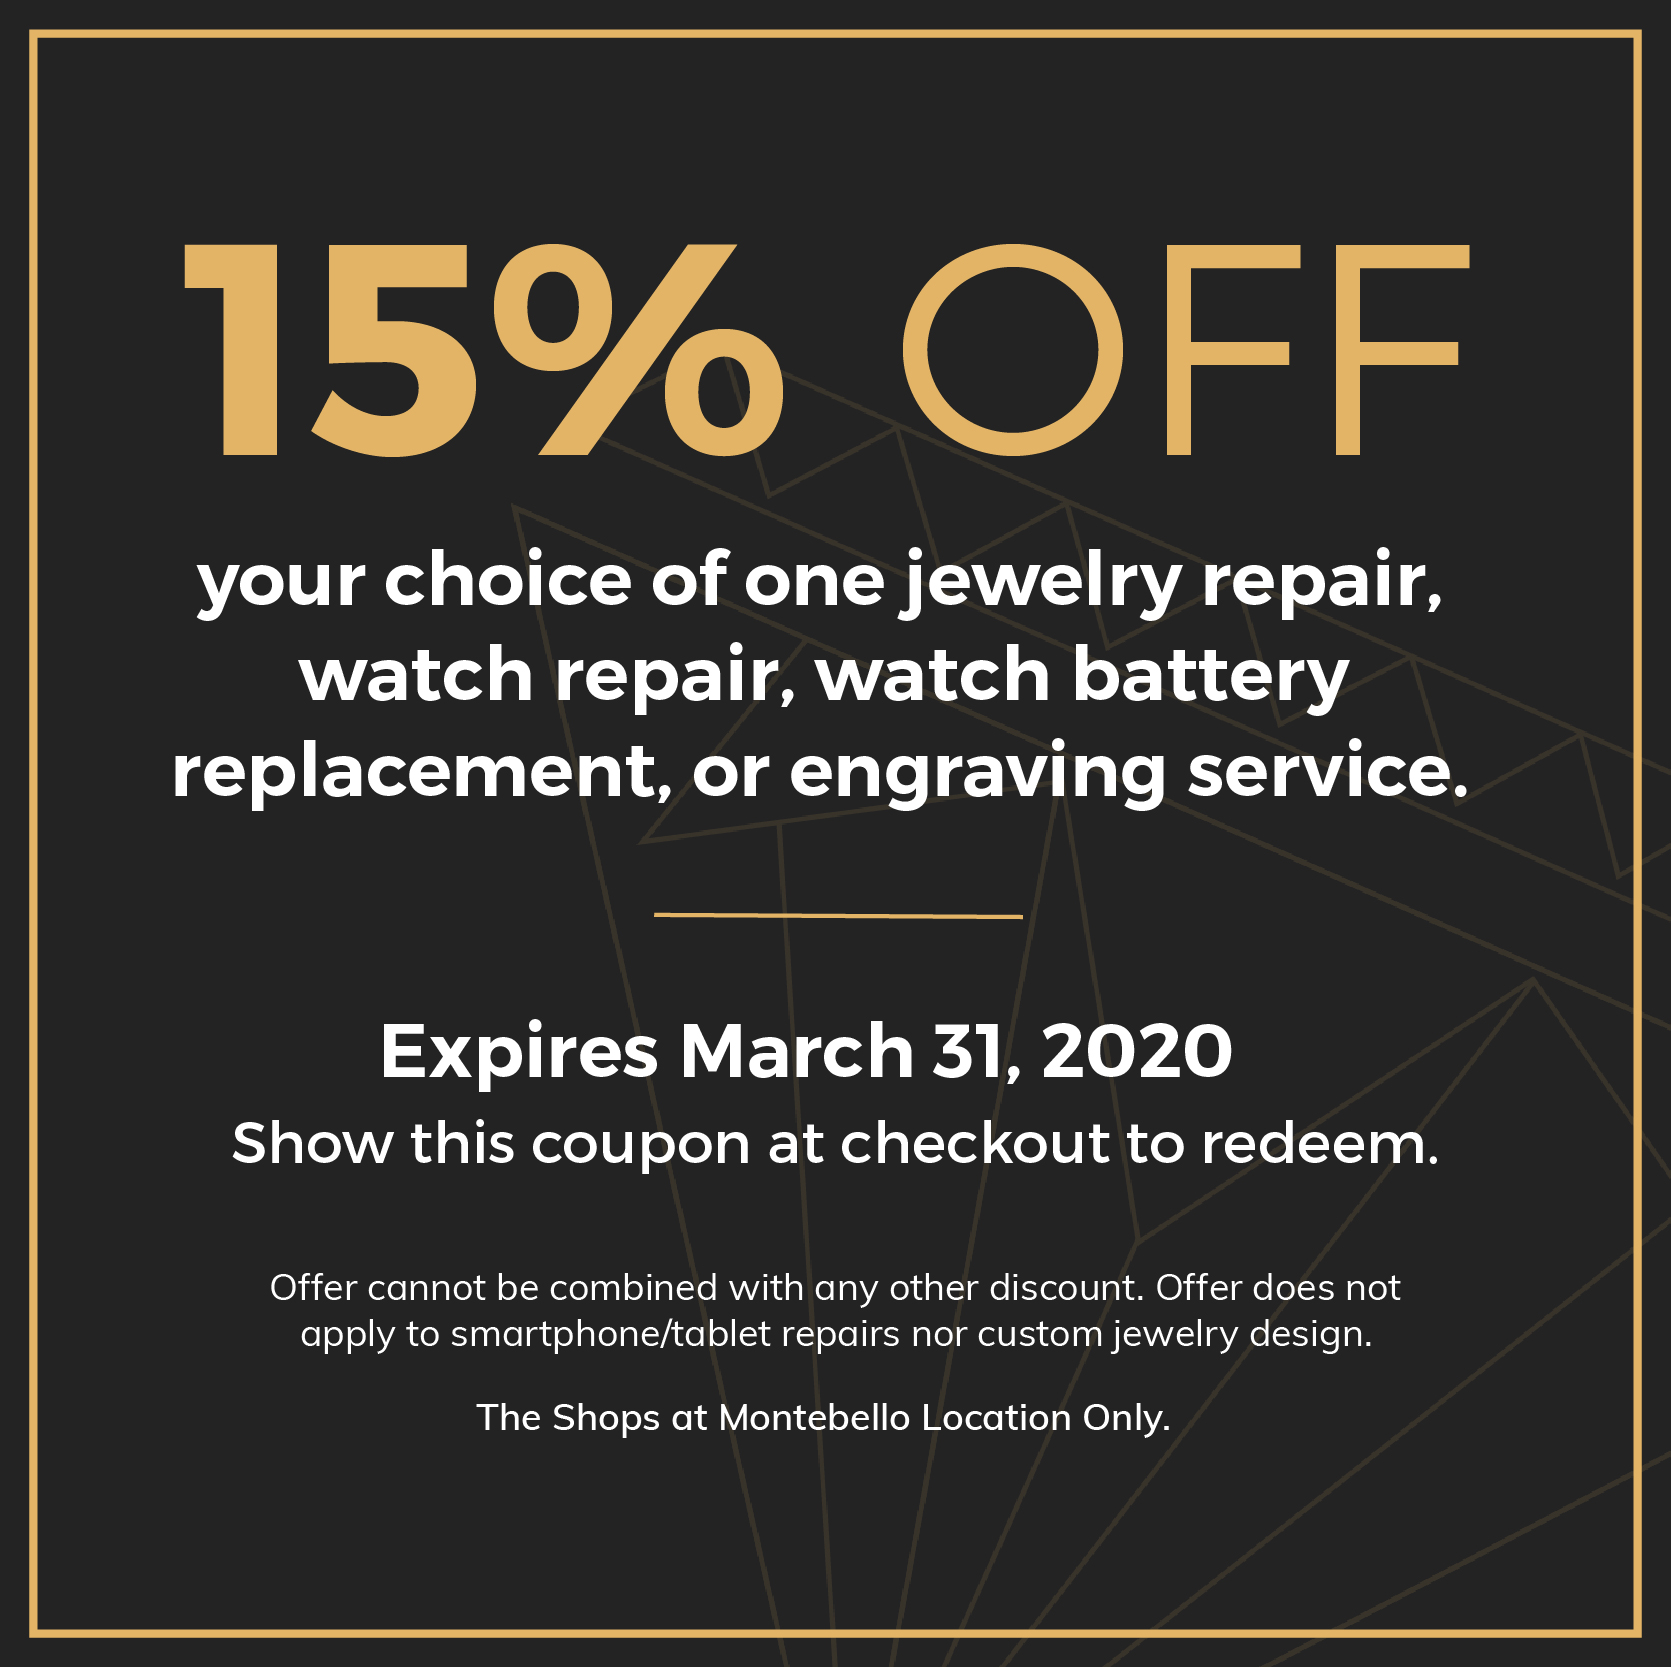 15% OFF. your choice of one jewelry repair, watch repair, watch battery replacement, or engraving service. Expires March 31, 2020. Show this coupon at checkout to redeem. Offer cannot be combined with any other discount. Offer does not apply to smartphone/tablet repairs nor custom jewelry design. The Shops at Montebello Location Only.